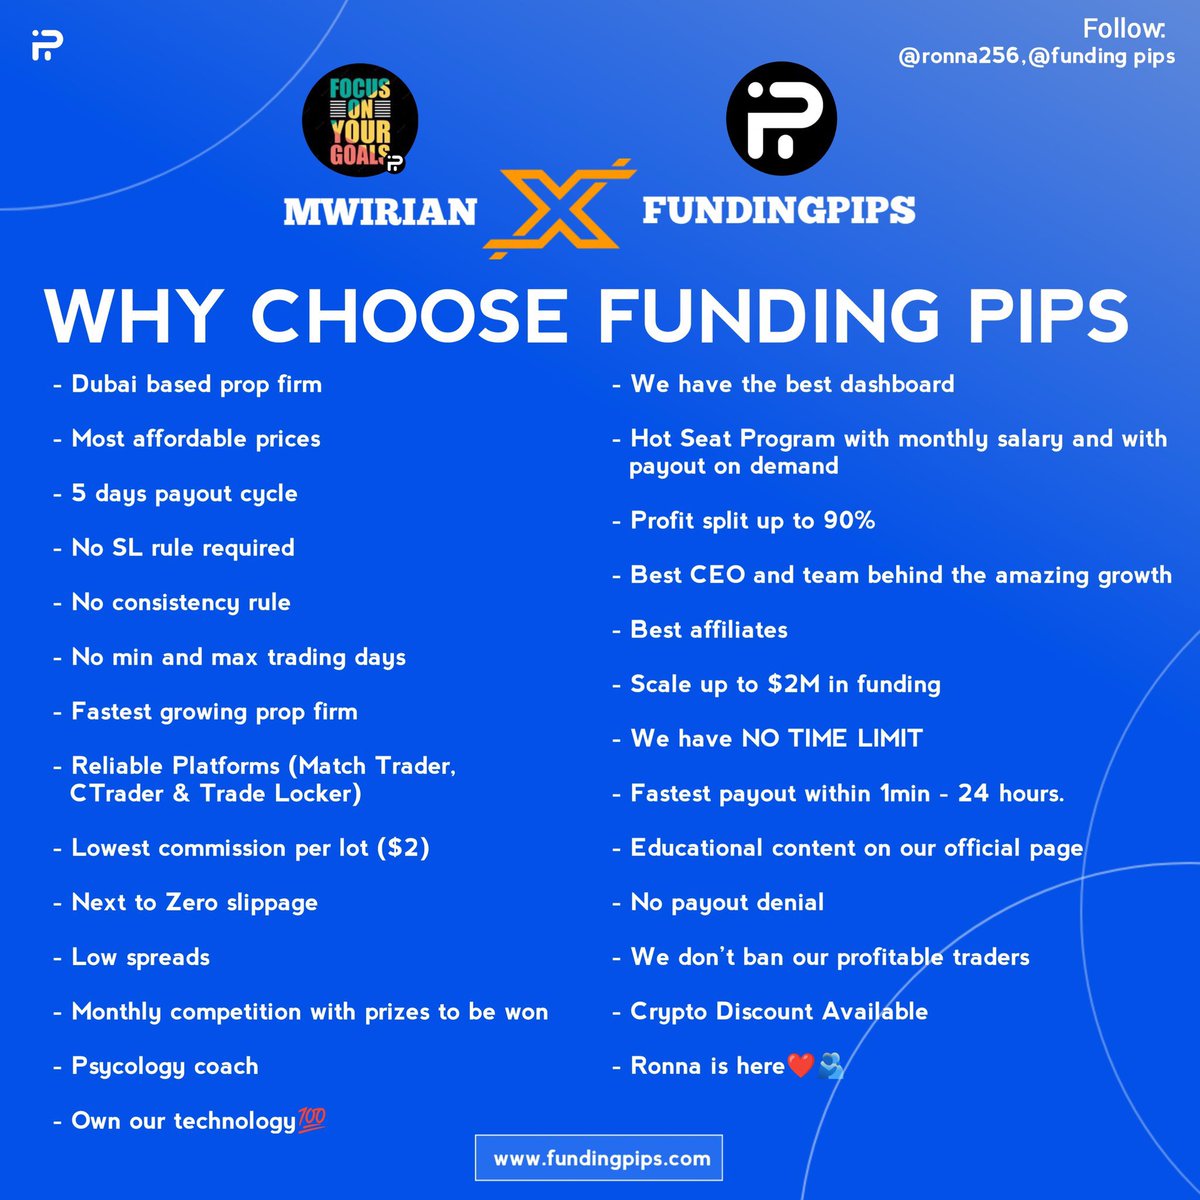 Good Morning World❤️😊

Why choose Funding Pips❤️.
We should always be your preferred evaluation firm💯.